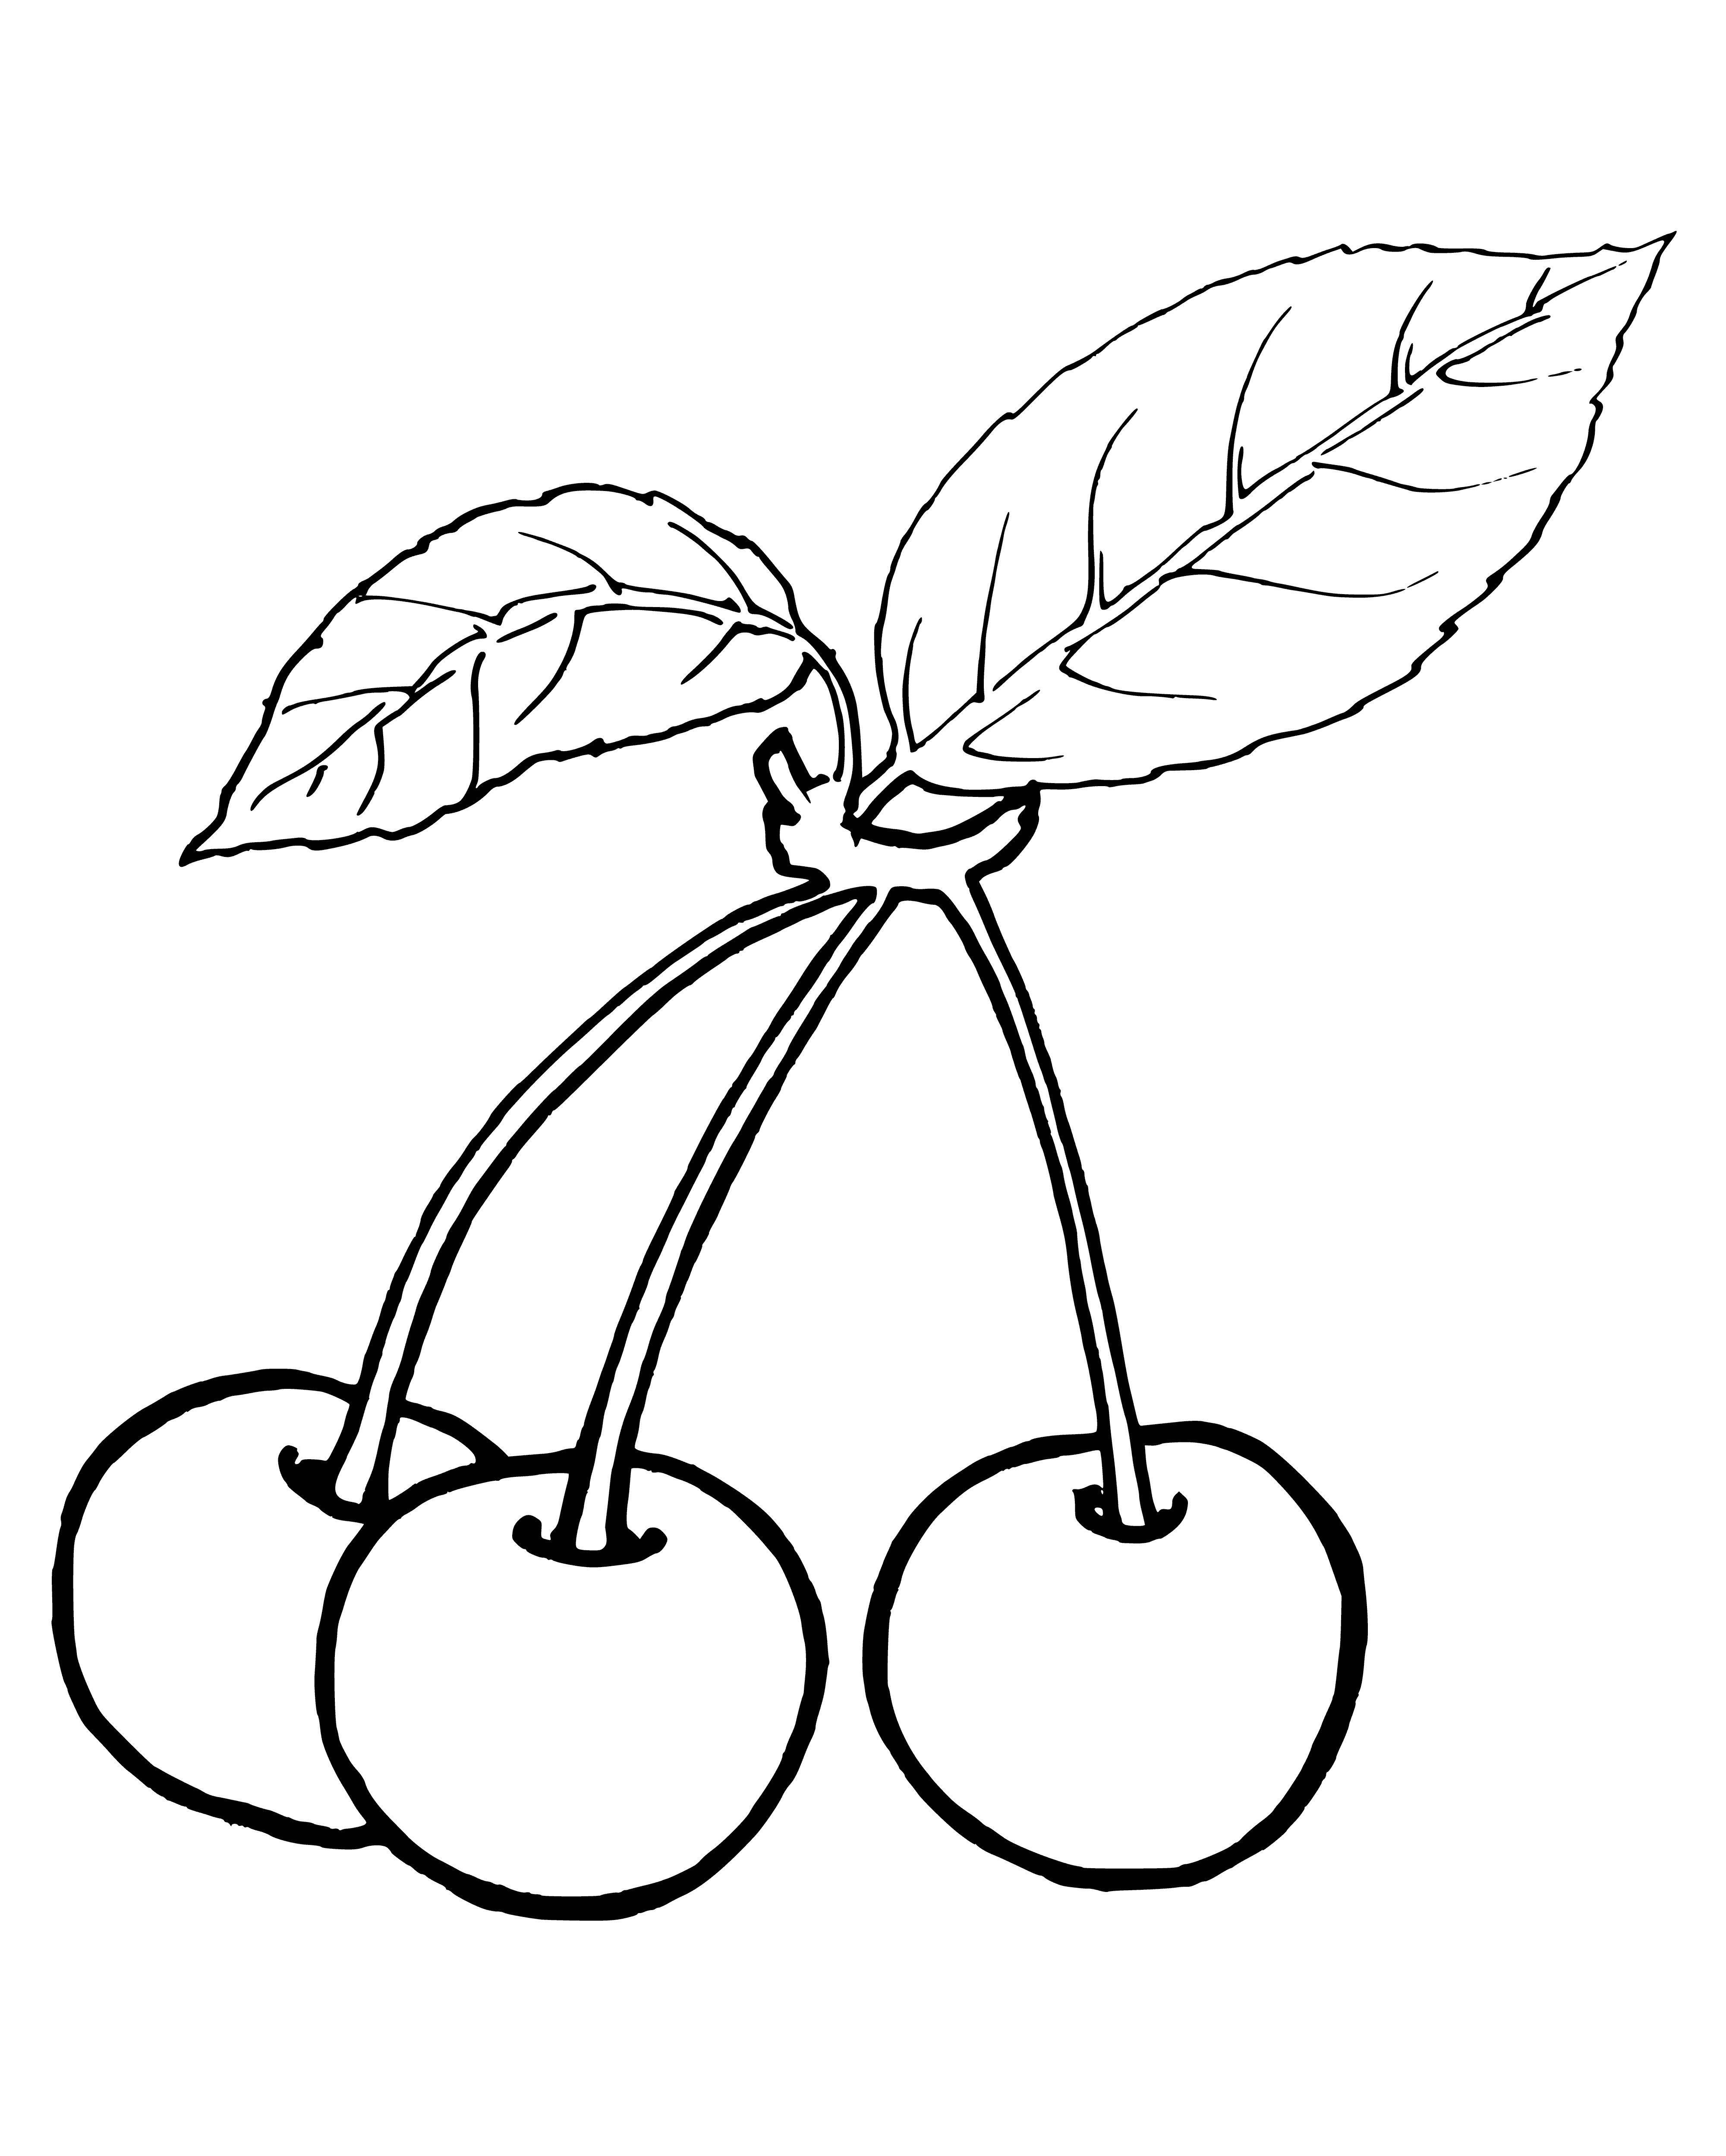 coloring page: Cherries are small, red fruits that grow in clusters; important food for birds, bears, and humans.